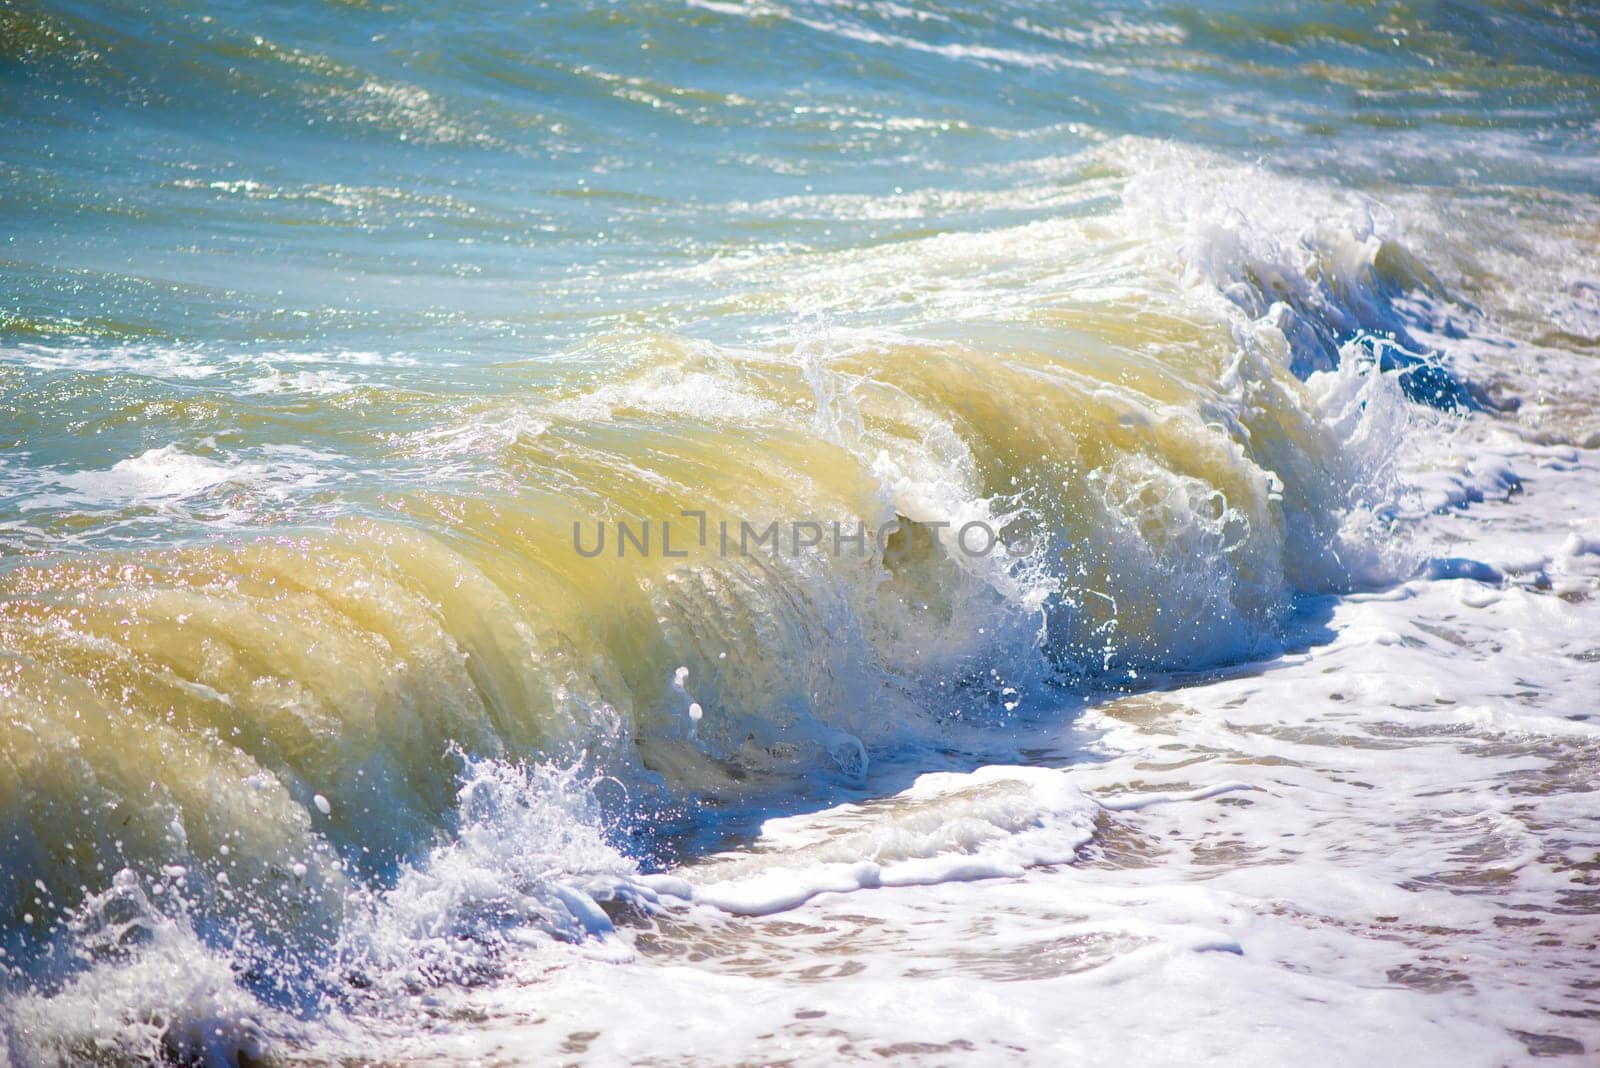 The sea is stormy. Sea of Azov. Water edge, sea, wave, storm - marine natural background. Birds seagulls on the sea coast, a beach by aprilphoto